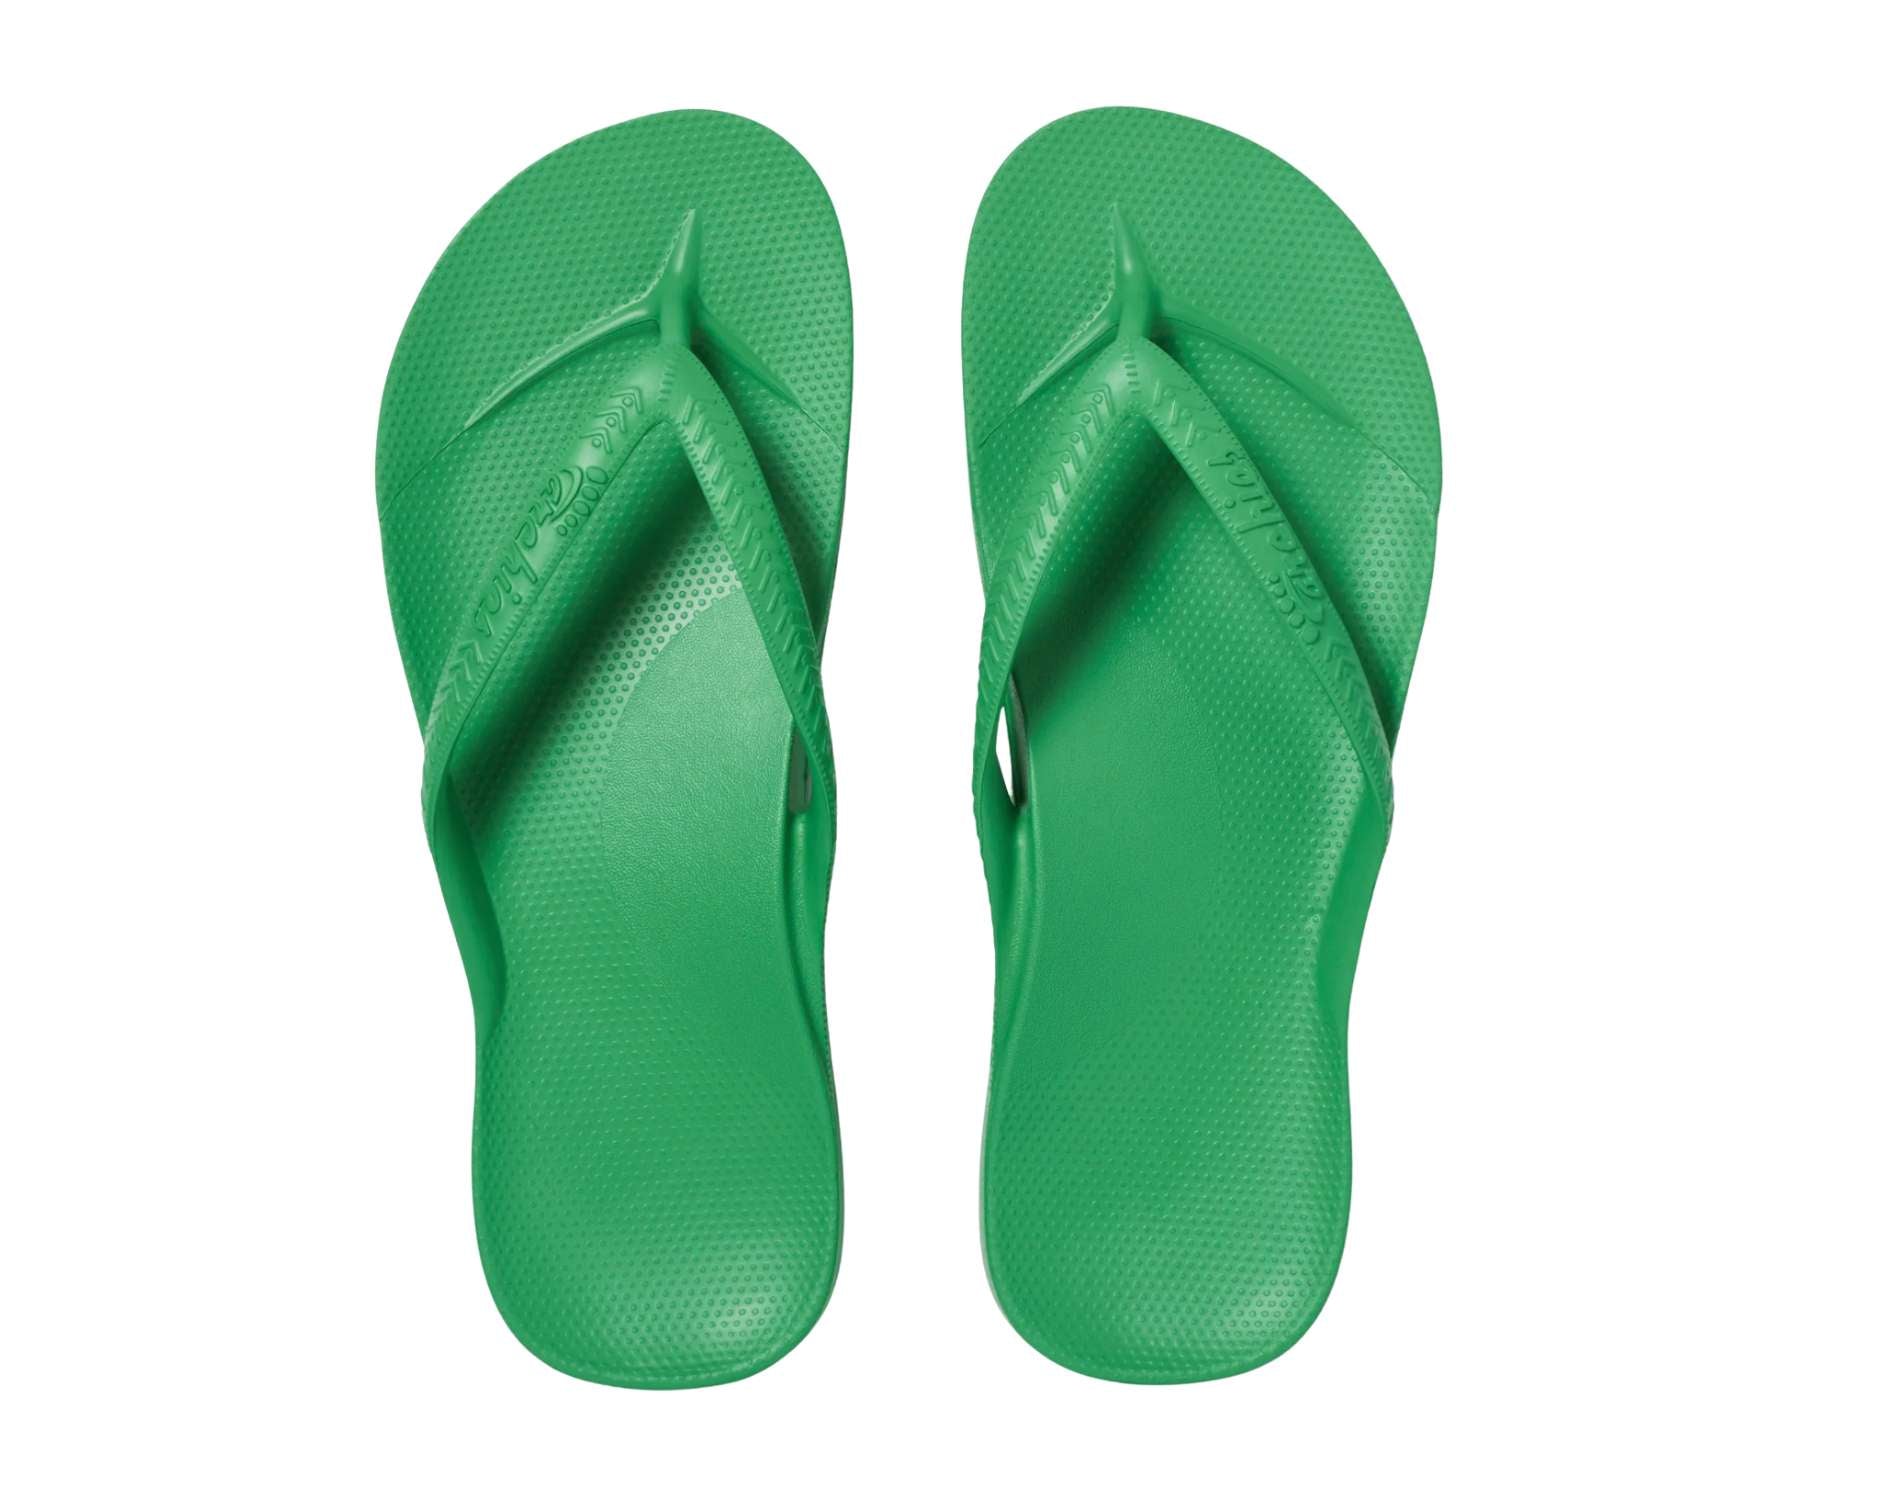 Archies arch support thongs in kelly green colour